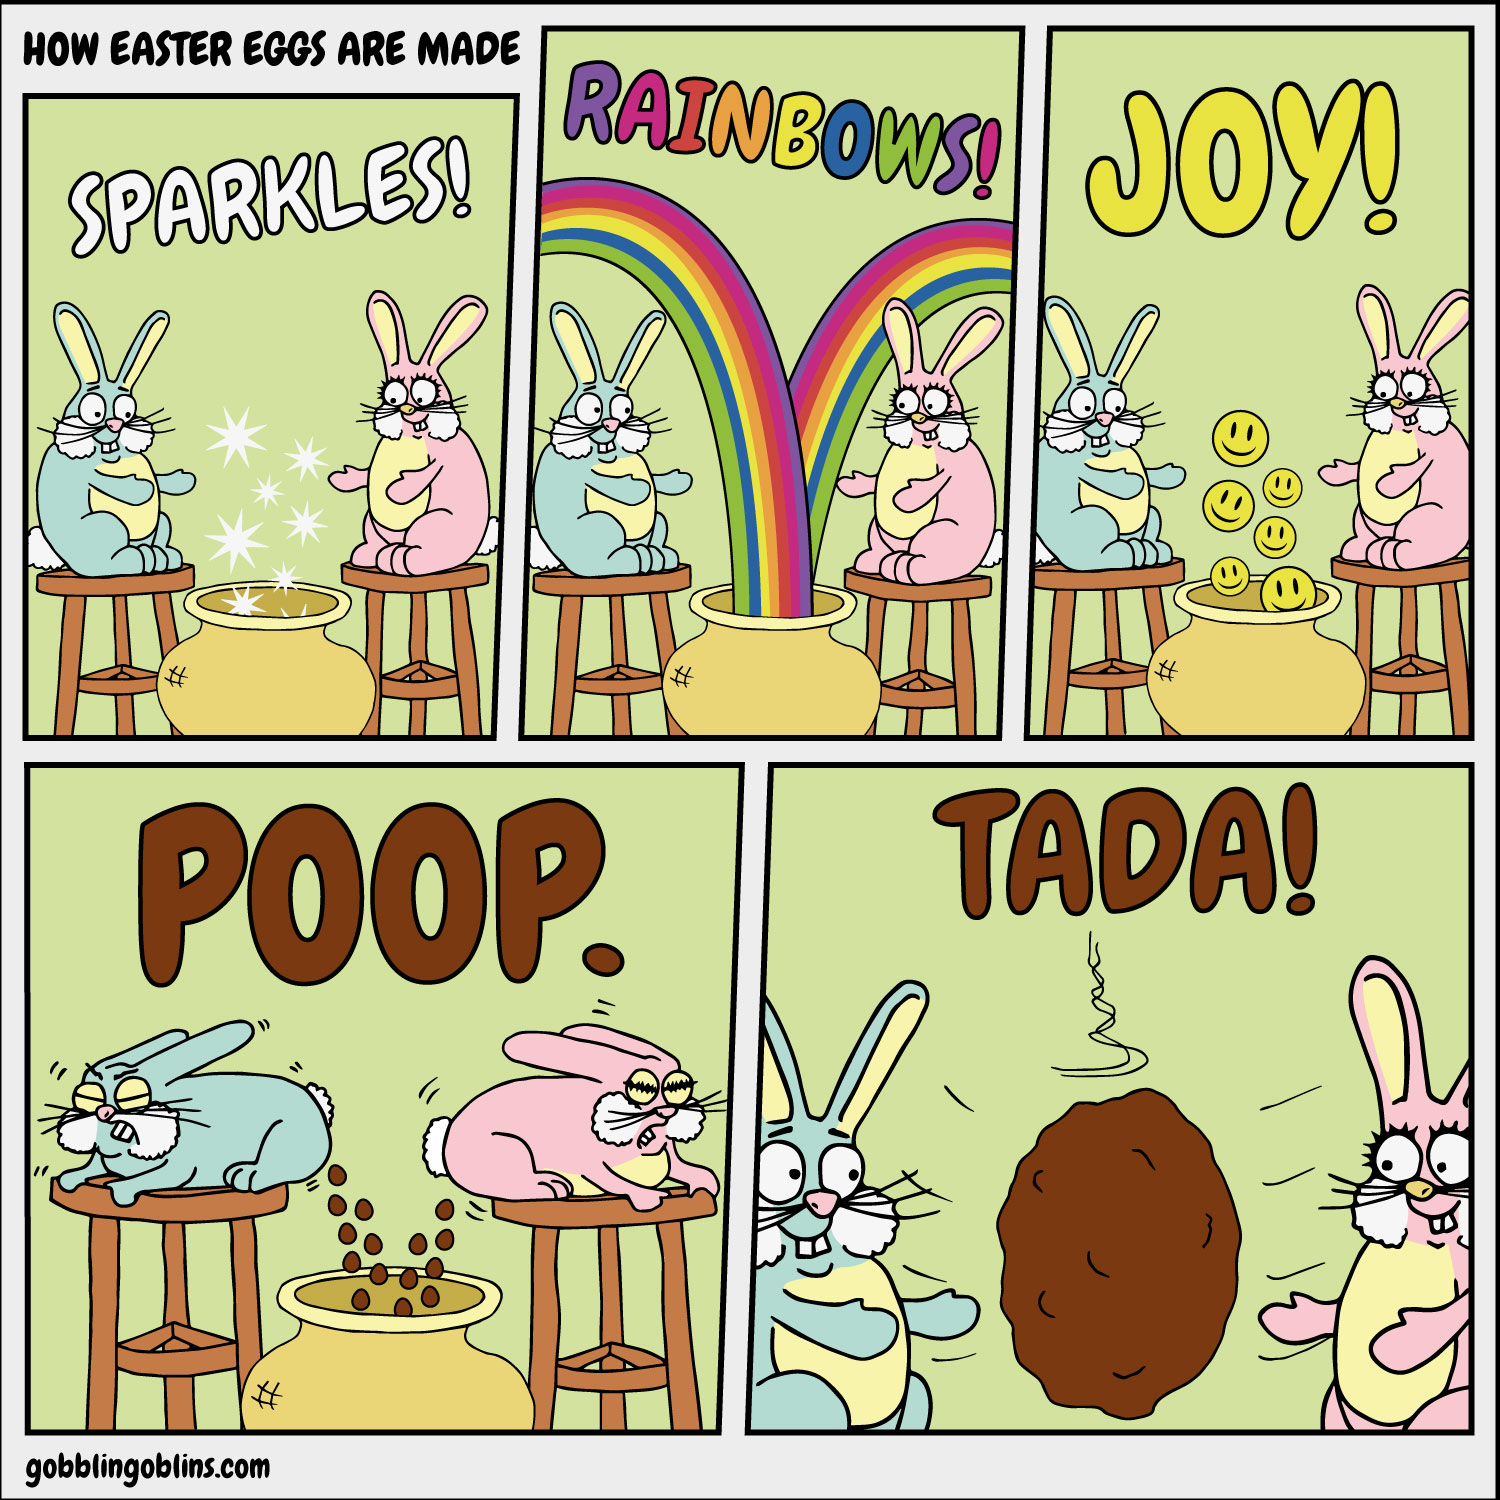 How Easter Eggs Are Made - a comic by Gobblin' Goblins